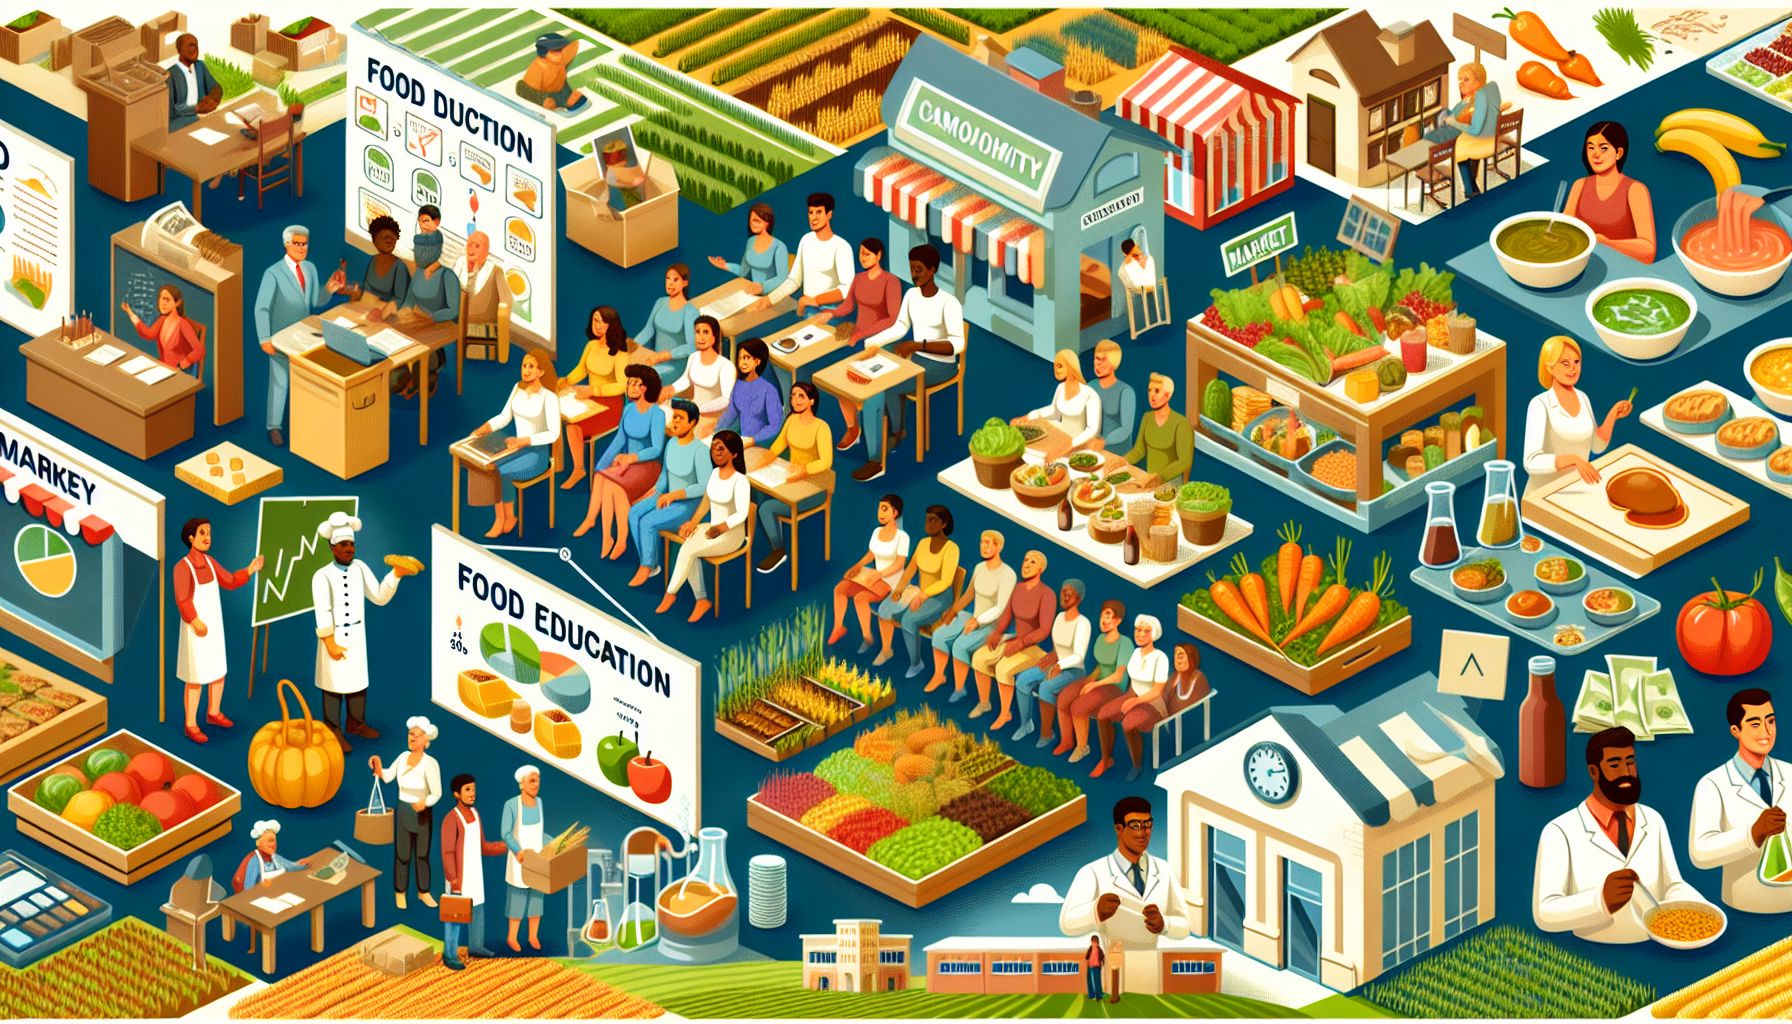 The Business of Eating: How Food Education Shapes Our Economy